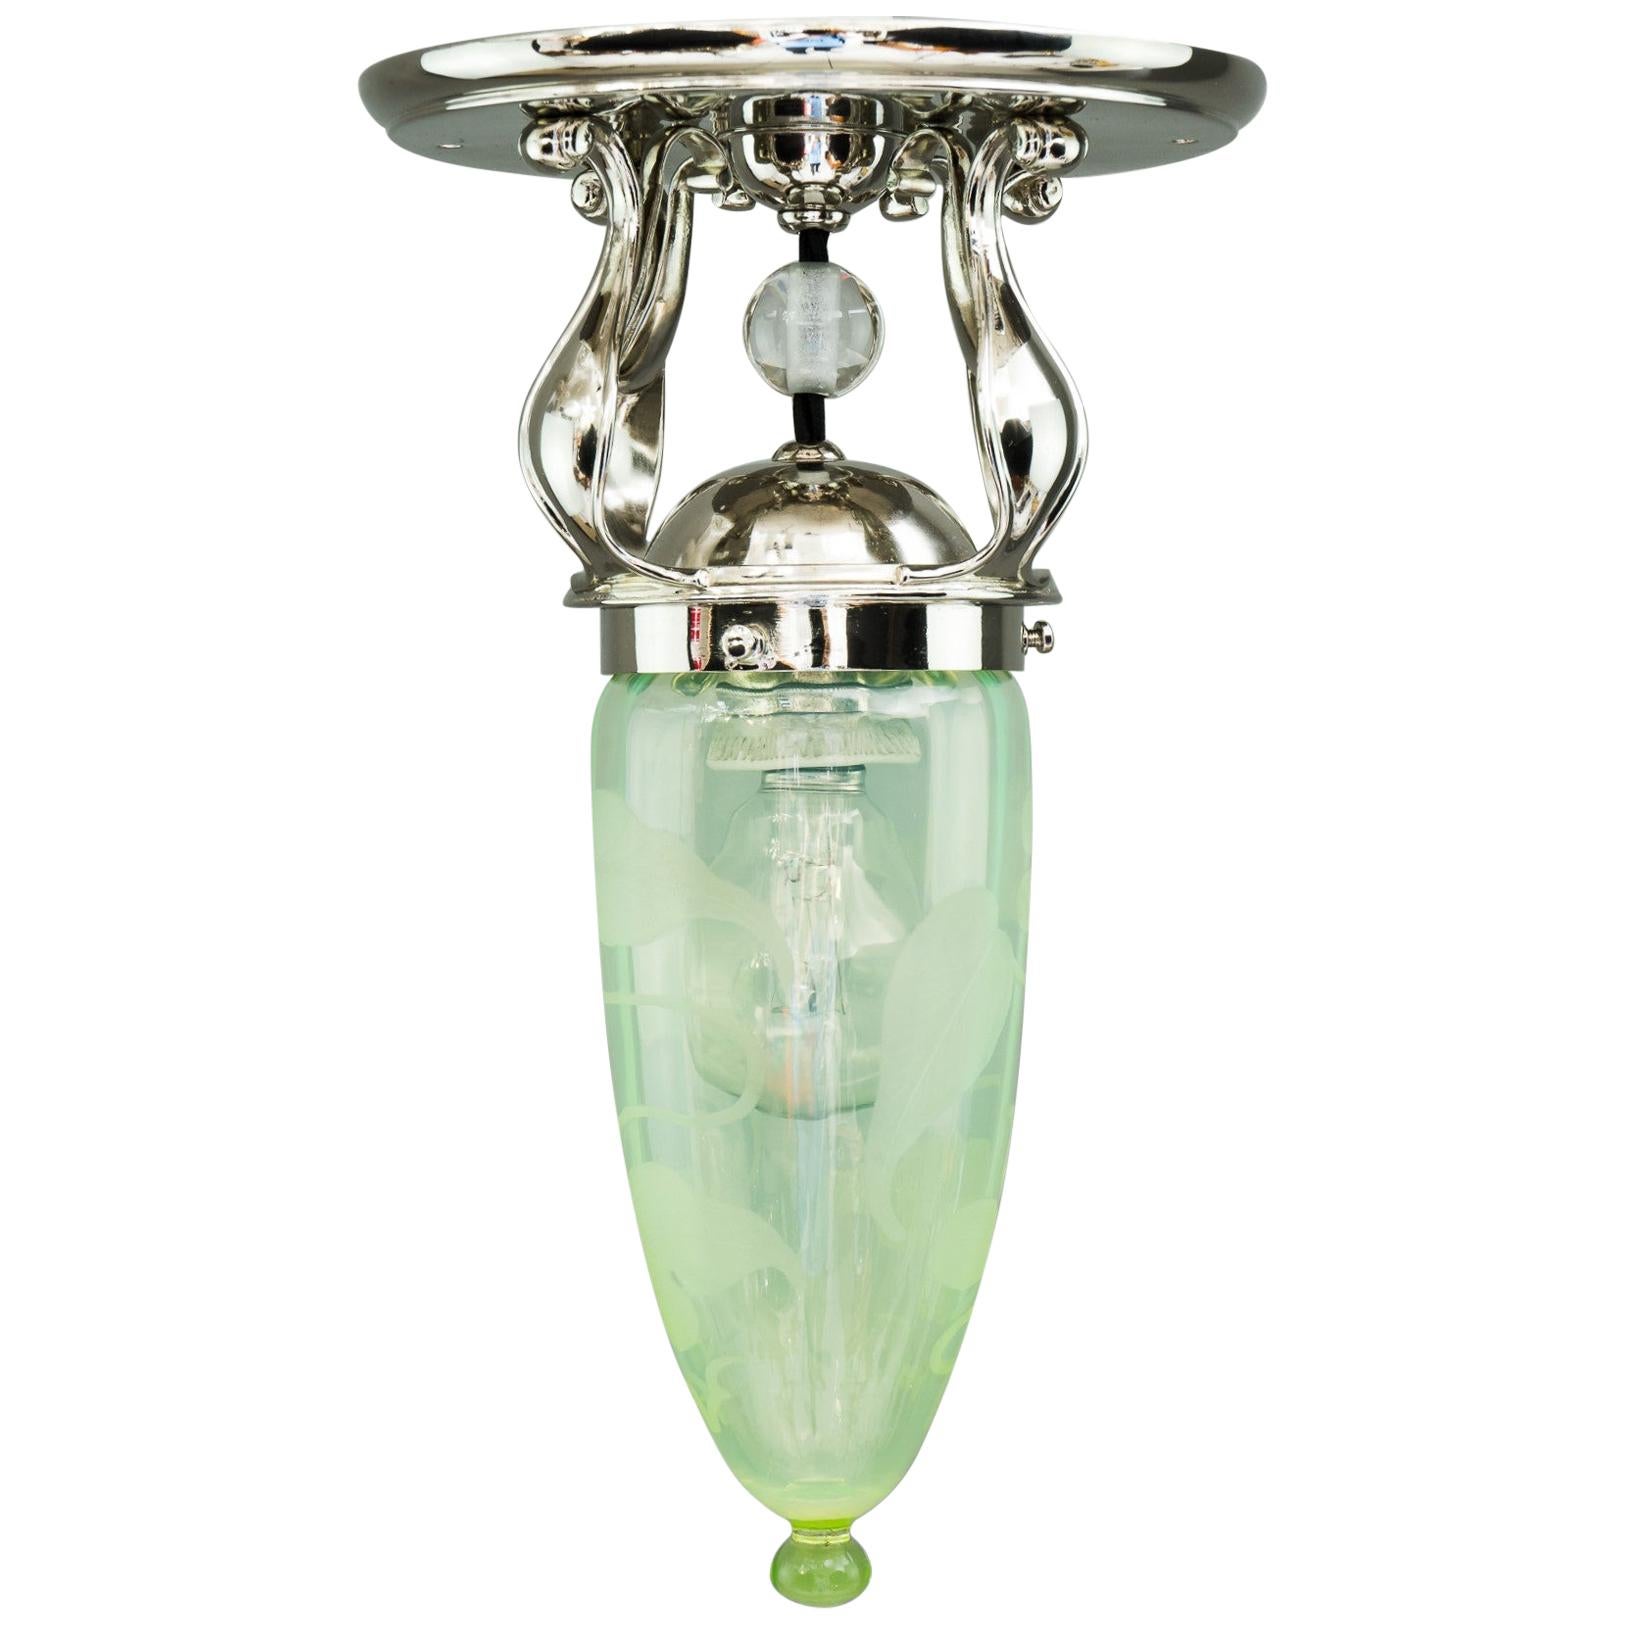 Art Deco Ceiling Lamp with Original Old Opaline Glass Shade, circa 1920s